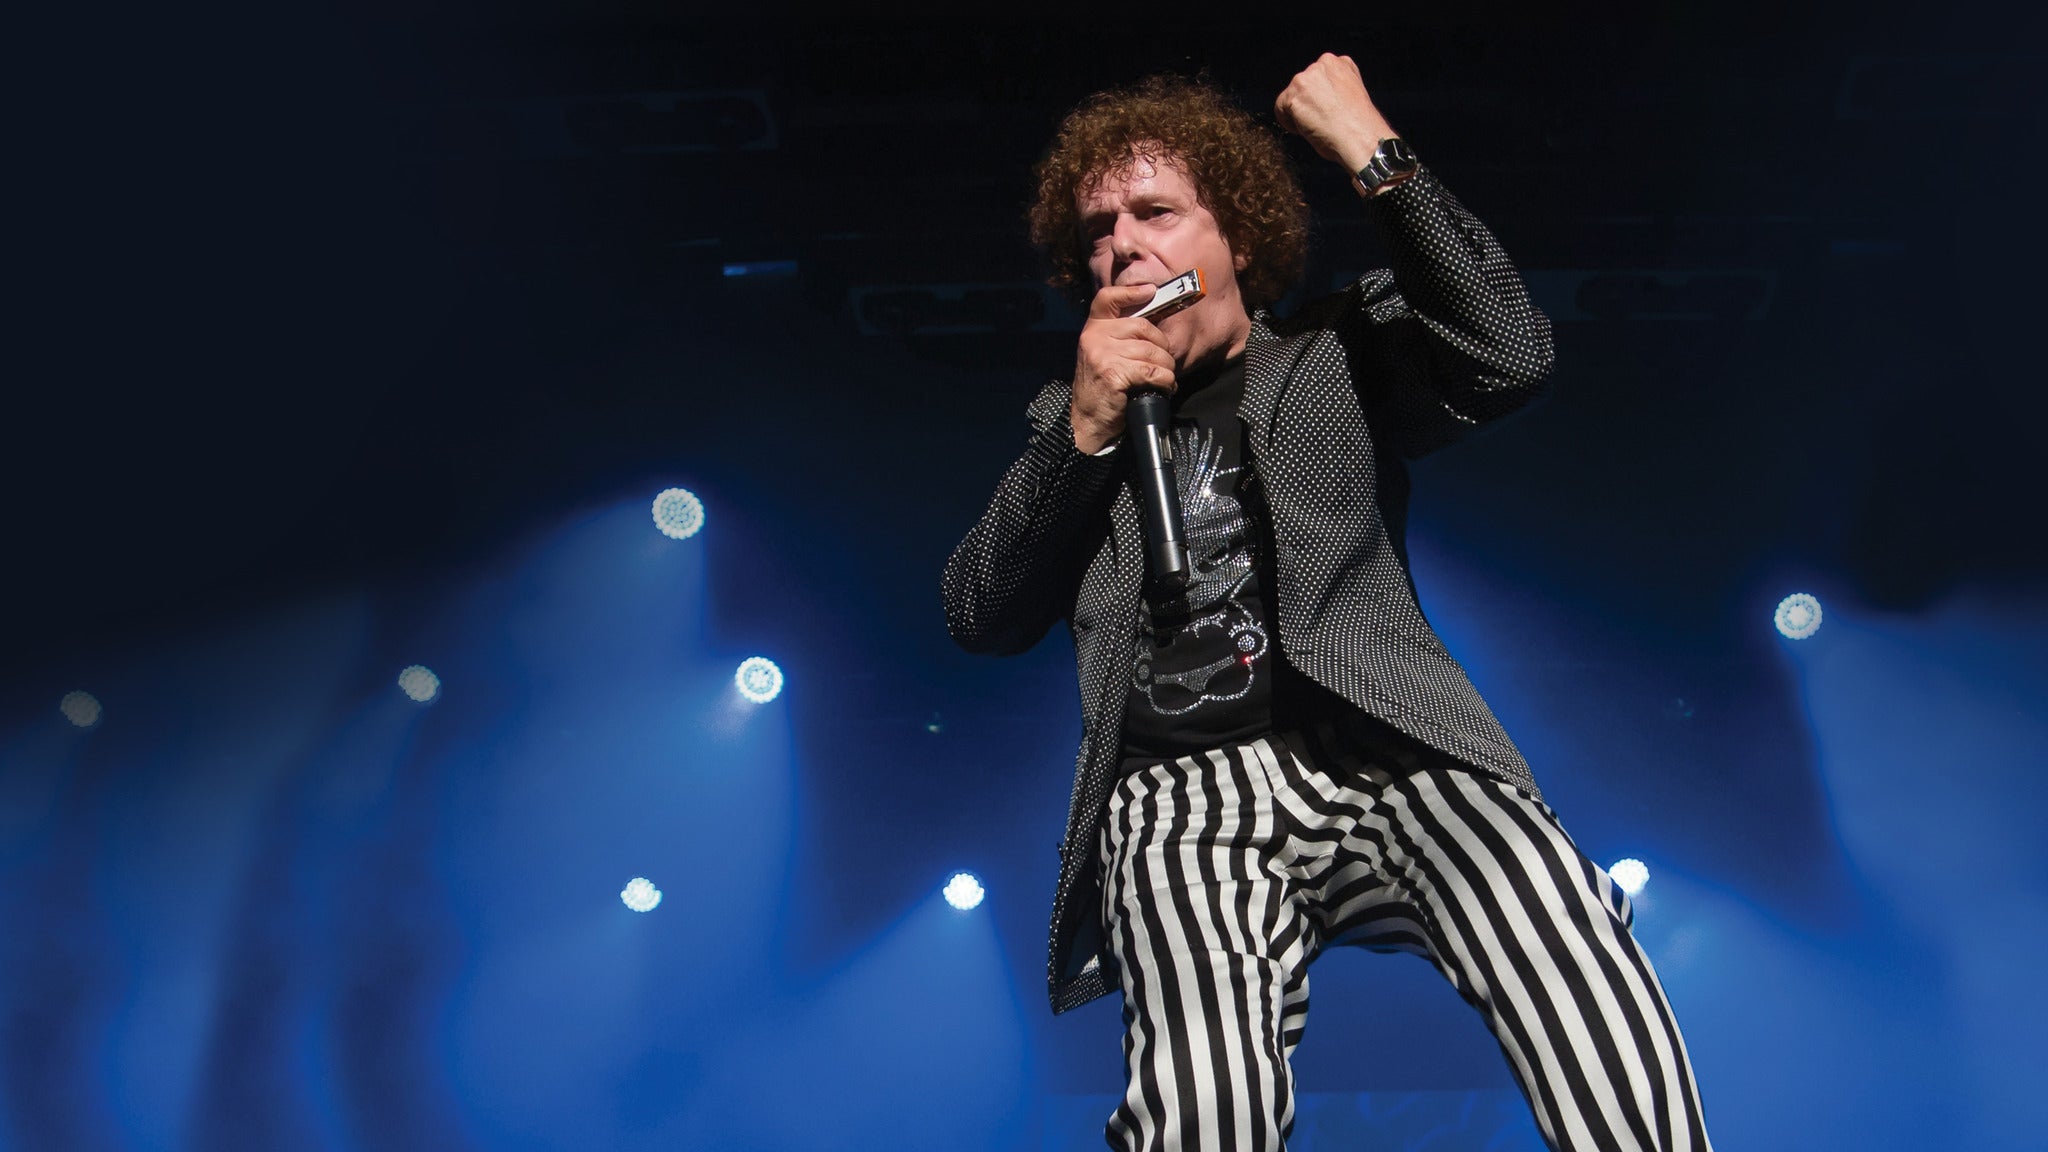 Image used with permission from Ticketmaster | Leo Sayer: The Show Must Go On - 50th Anniversary Show tickets